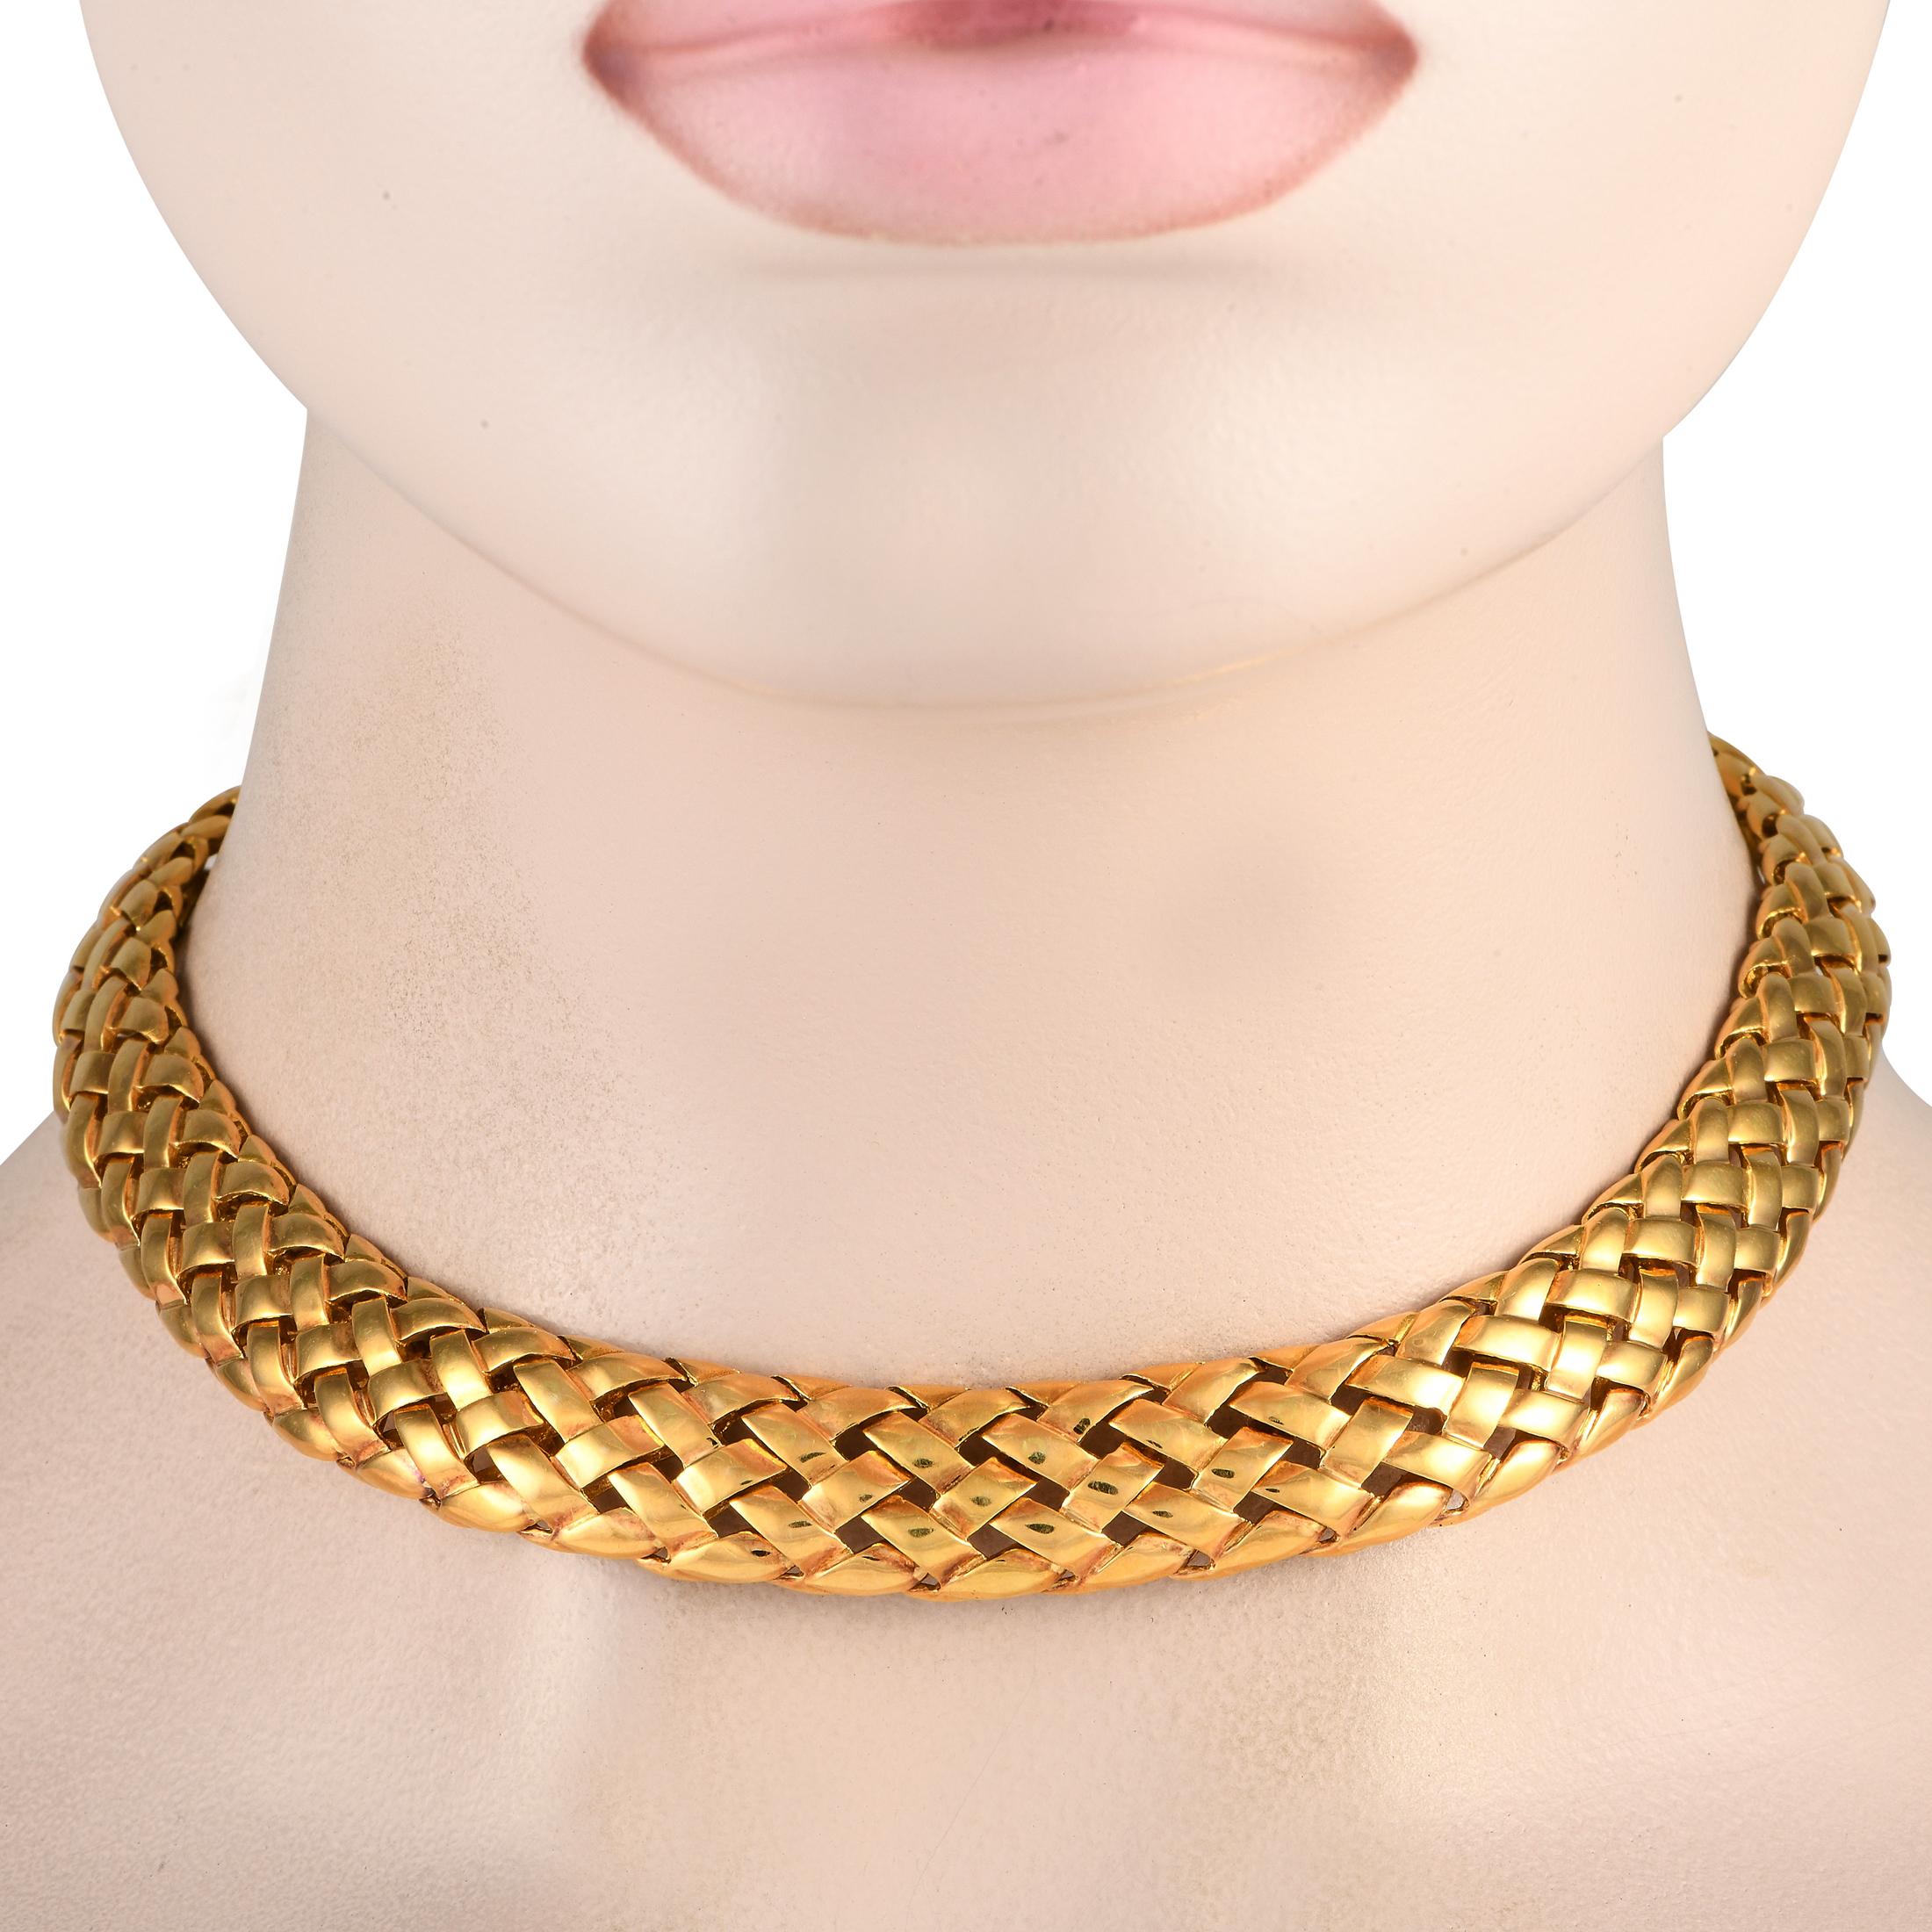 This necklace has the distinct charm of yesteryears. The Van Cleef & Arpels Basket Weave Necklace features an intricate woven pattern in solid 18K yellow gold. Wear this piece to polish your formal wear with retro elegance. The necklace measures